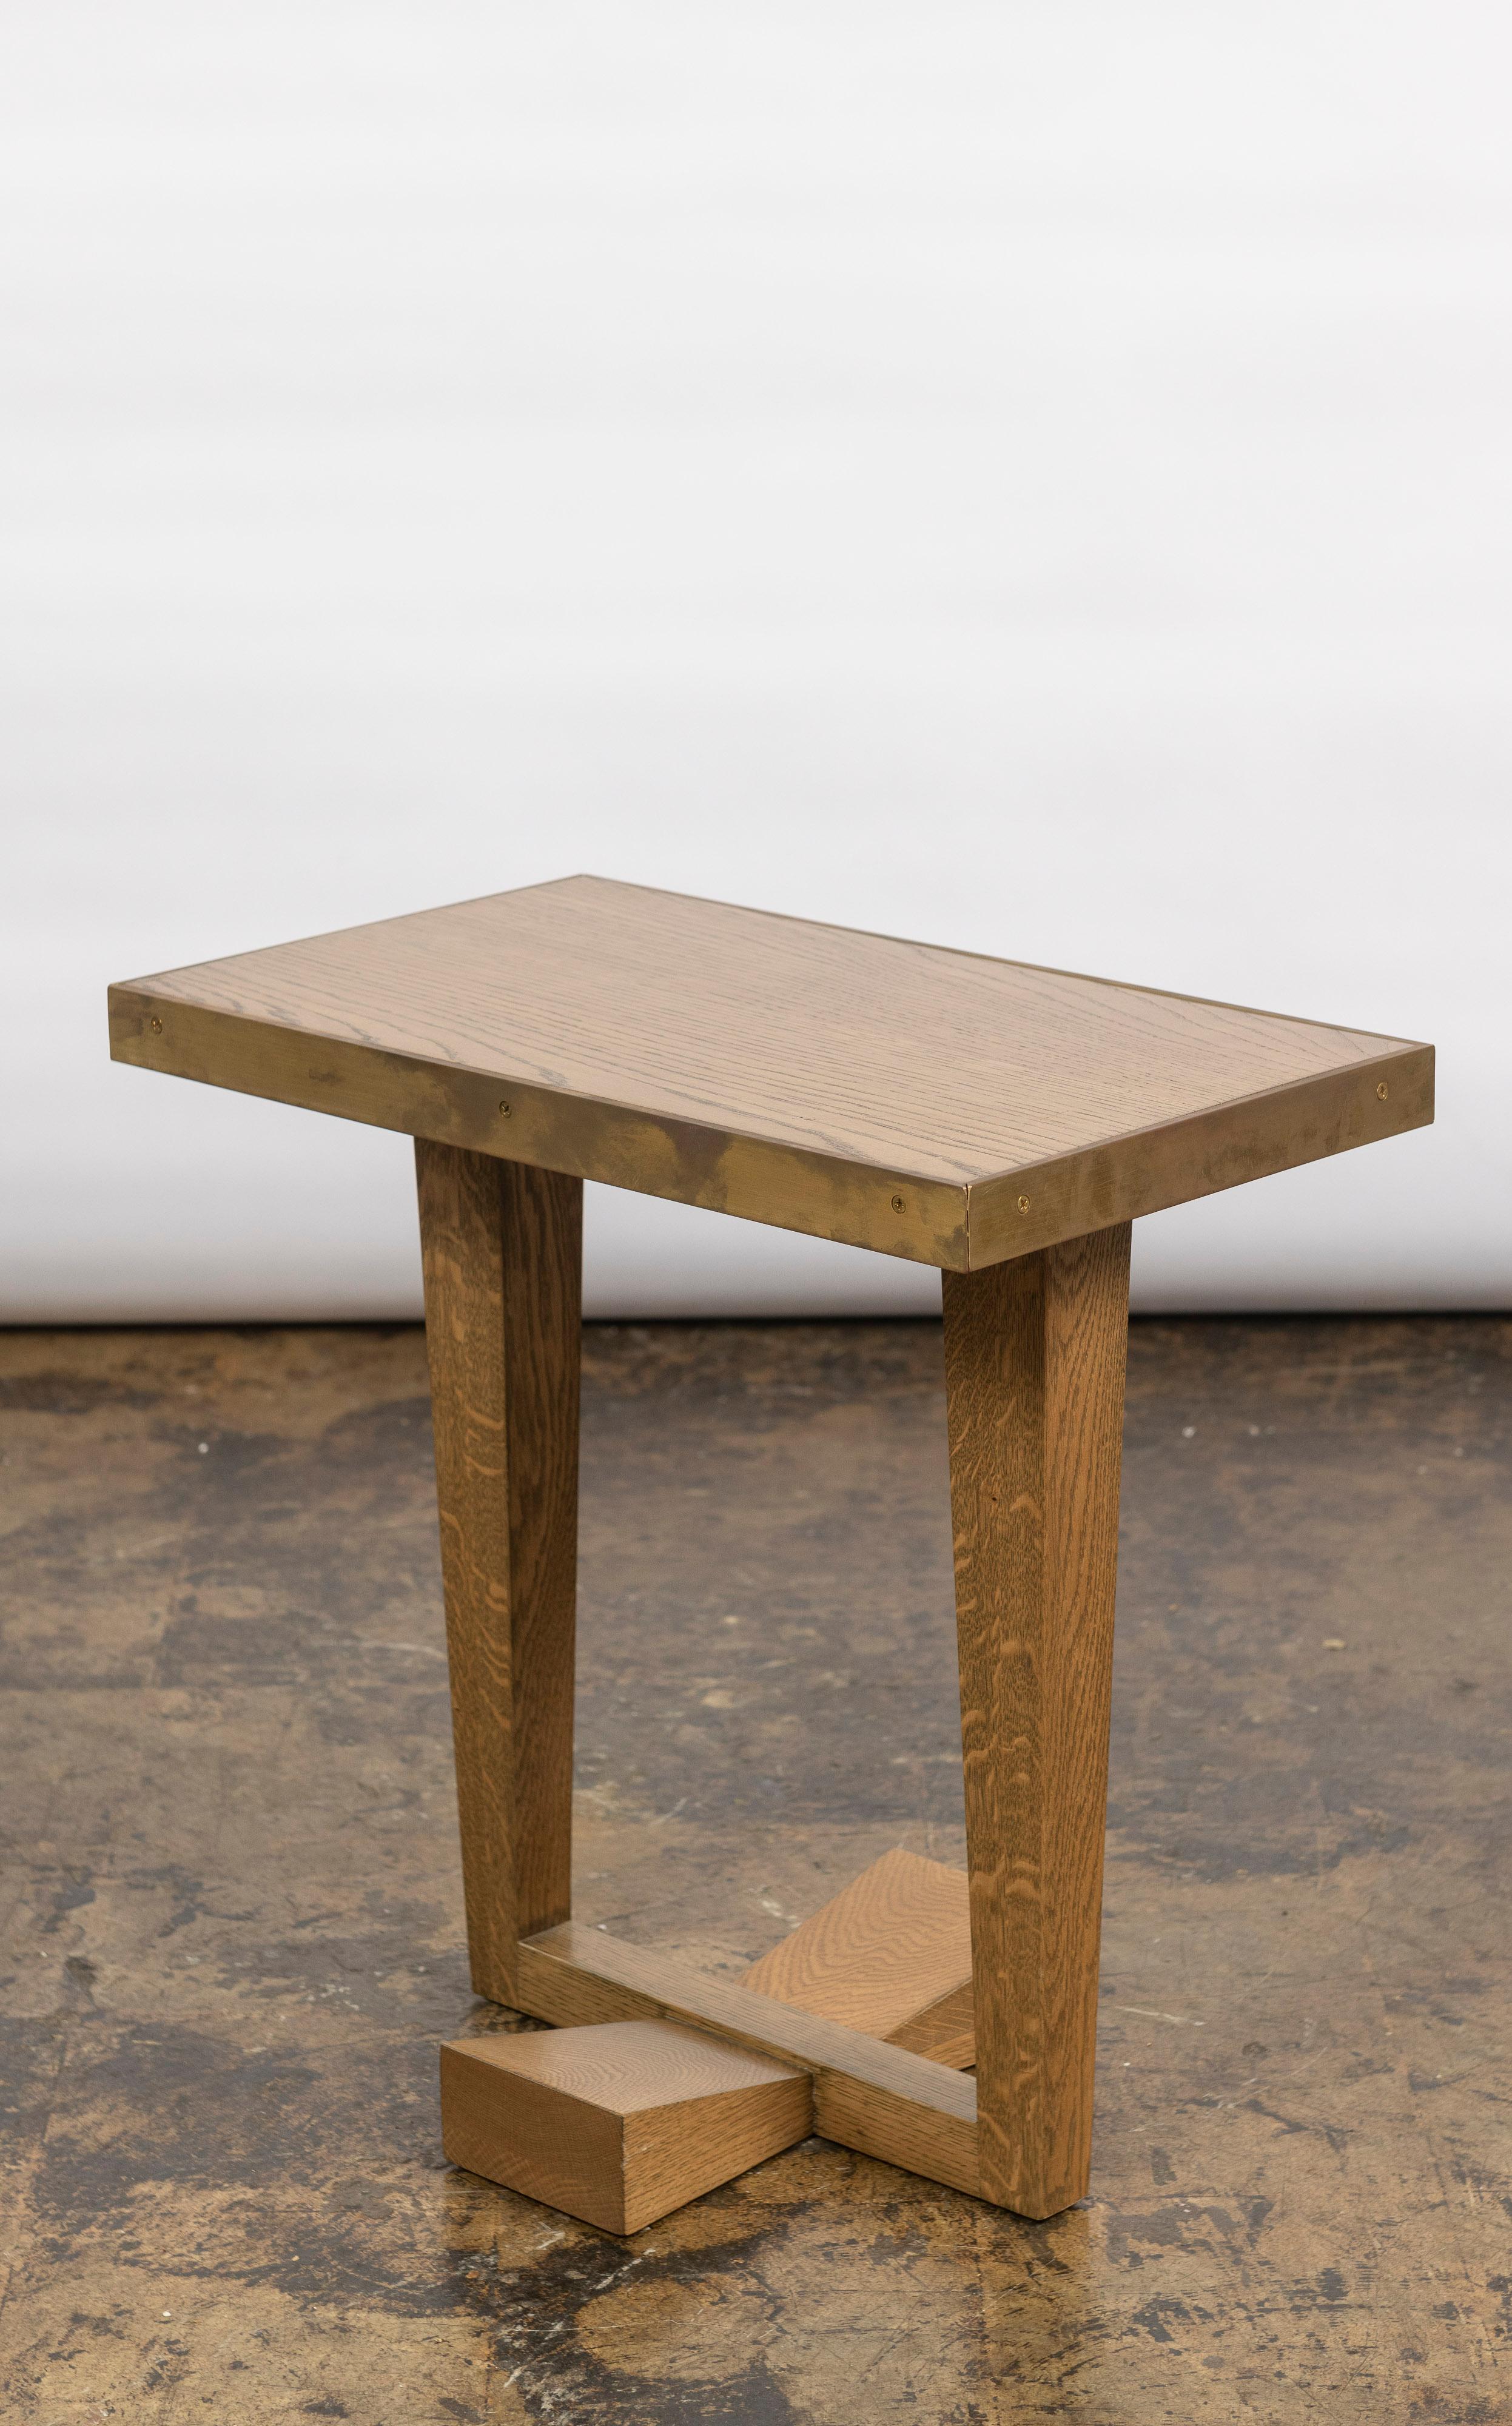 The Rialto side table is made from American walnut or white oak, features a lacquered brass banding and is made in California. Perfect size for so many places in a residence. Excellent construction.